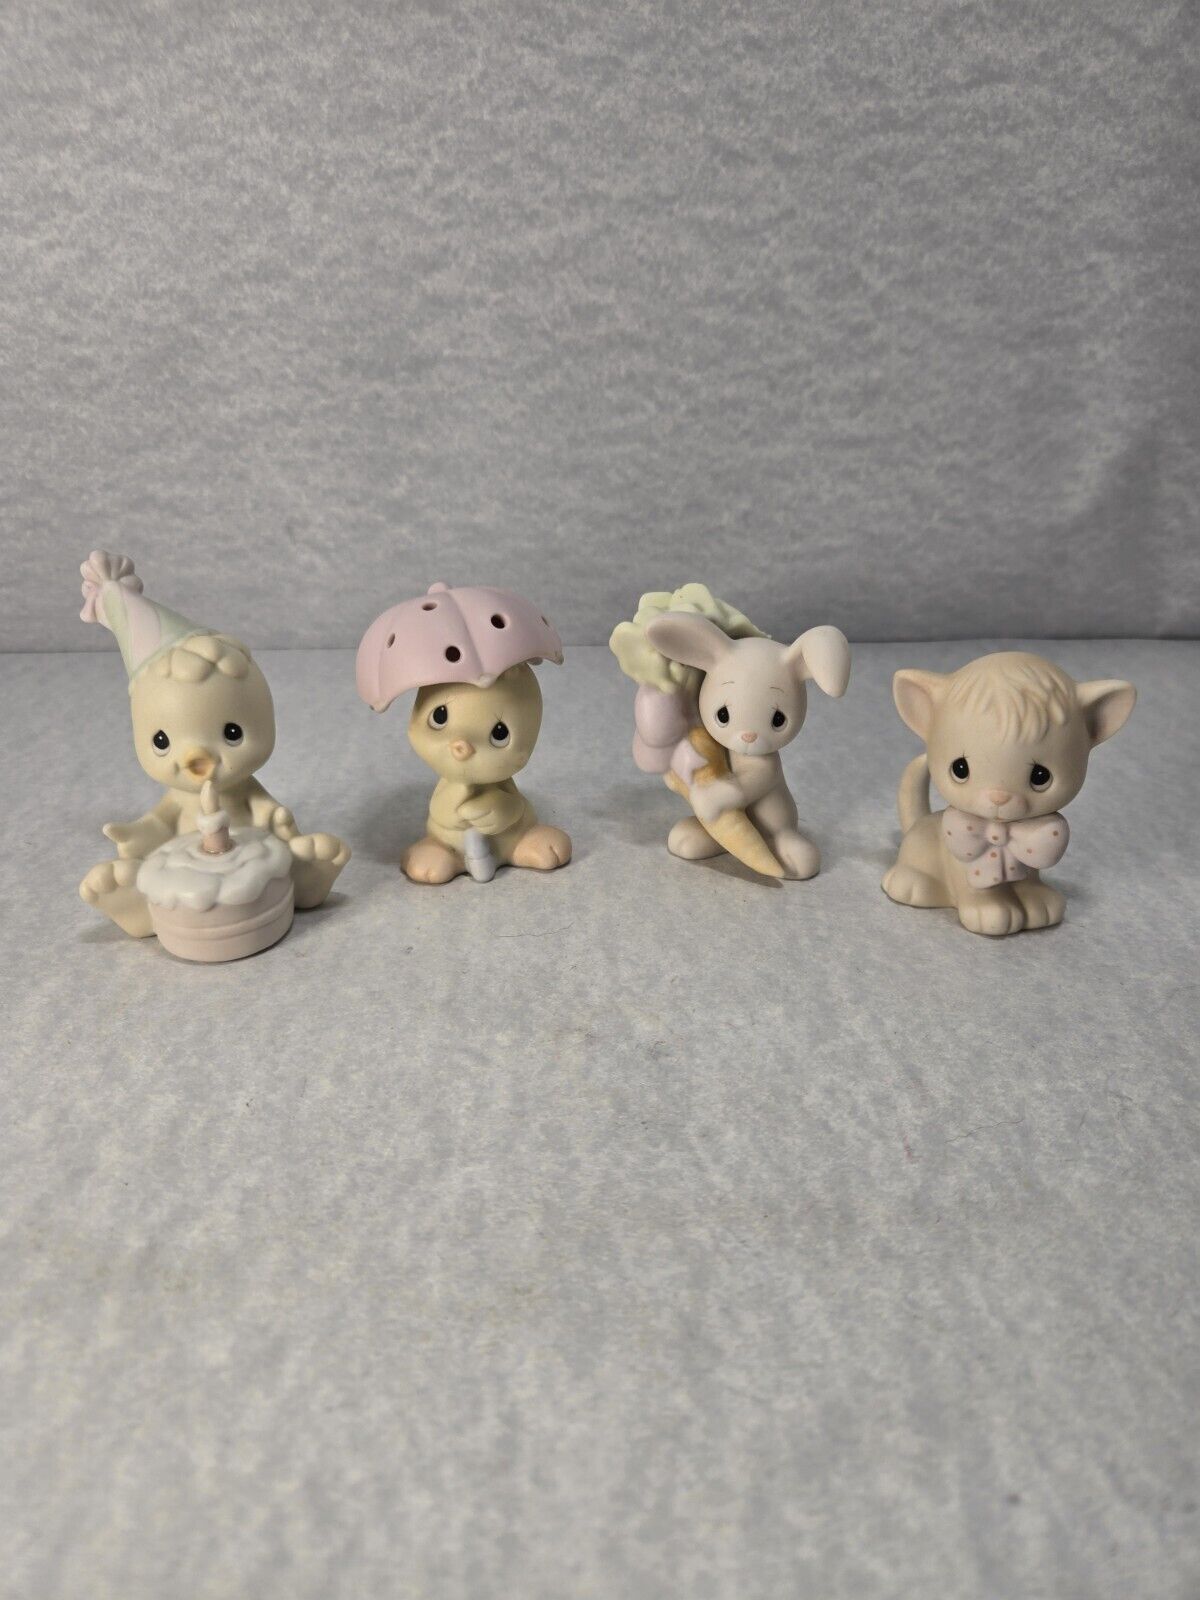 Vintage Enesco Precious Moments Animal Figurines Lot Of 4 Various Years 82 92 96